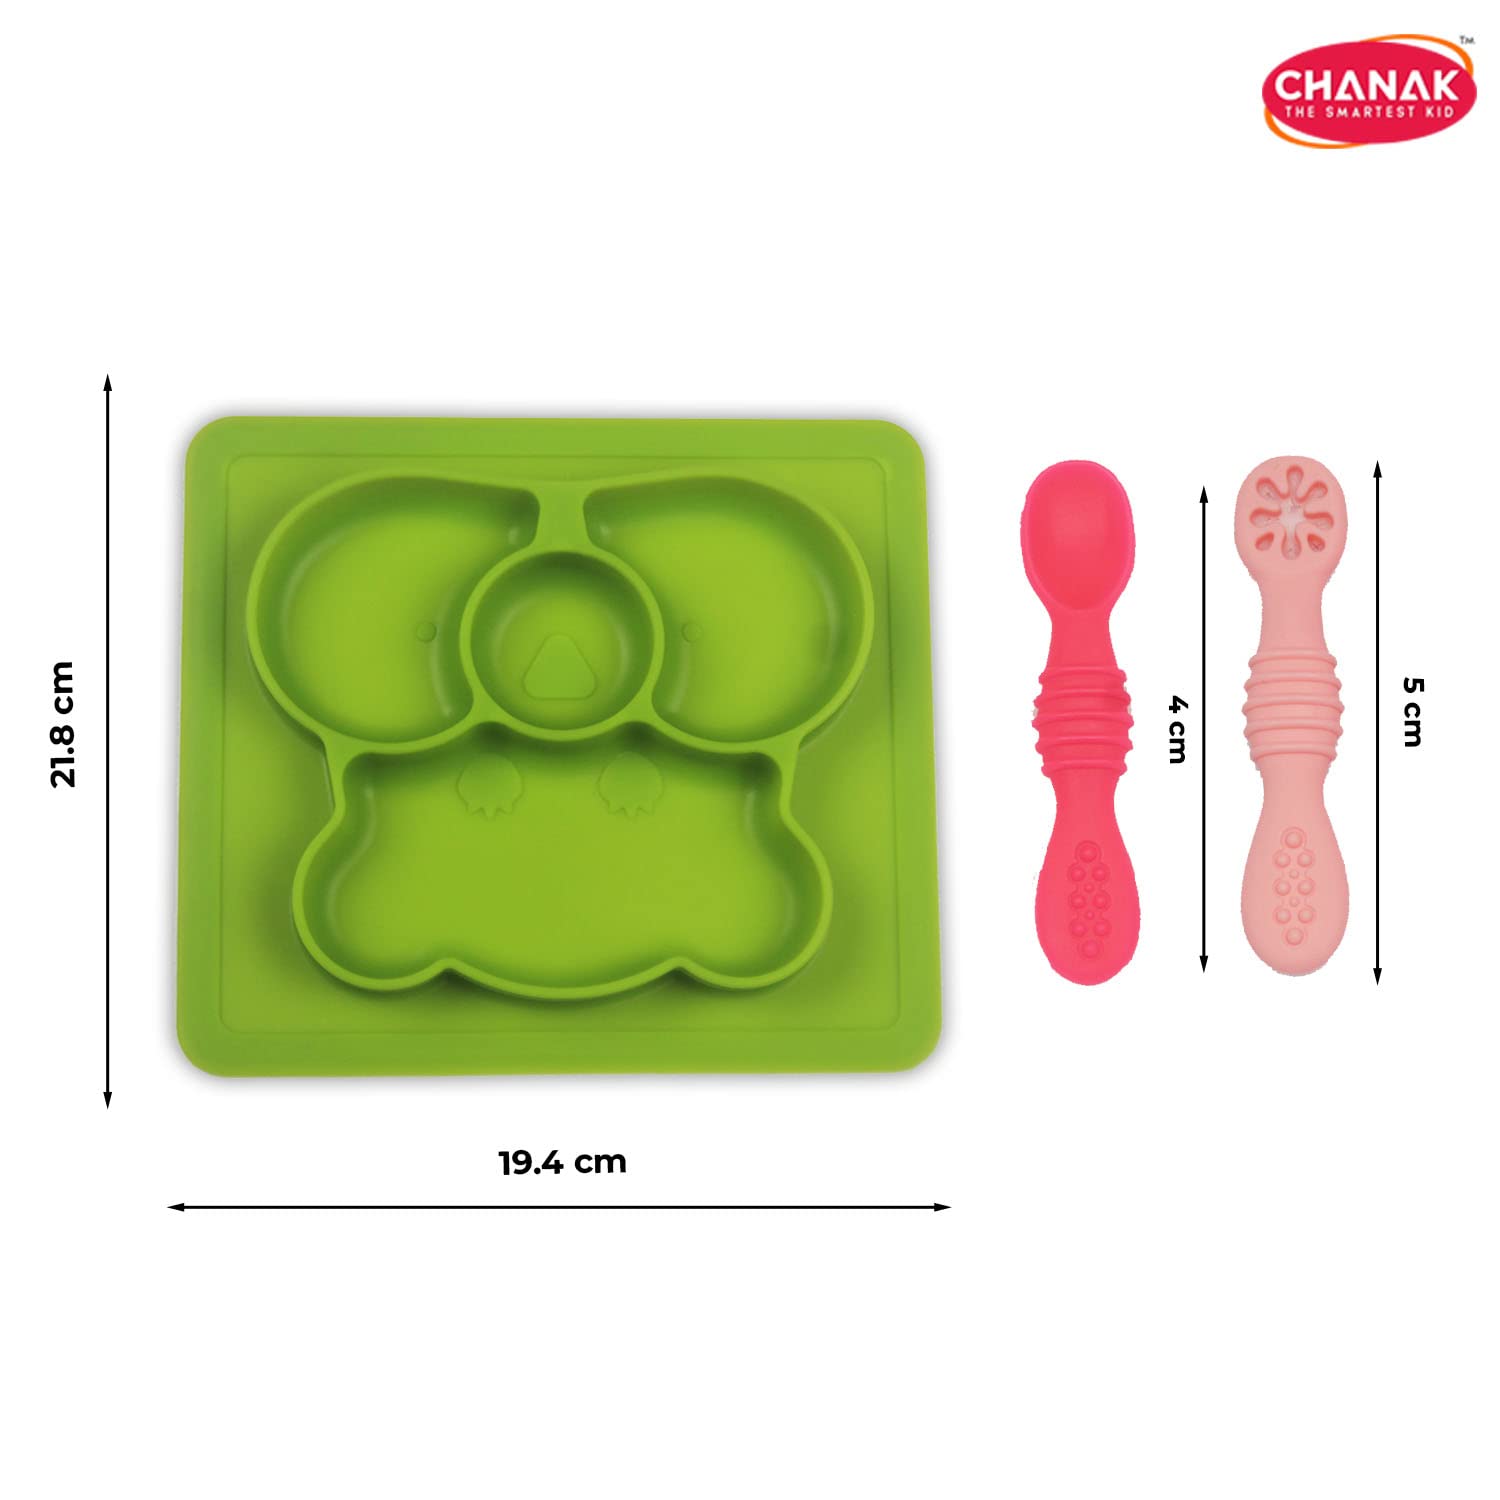 Chanak Baby Food Tray - Silicon Plate with Multiple Compartments & Two Spoons (Light Green) - chanak